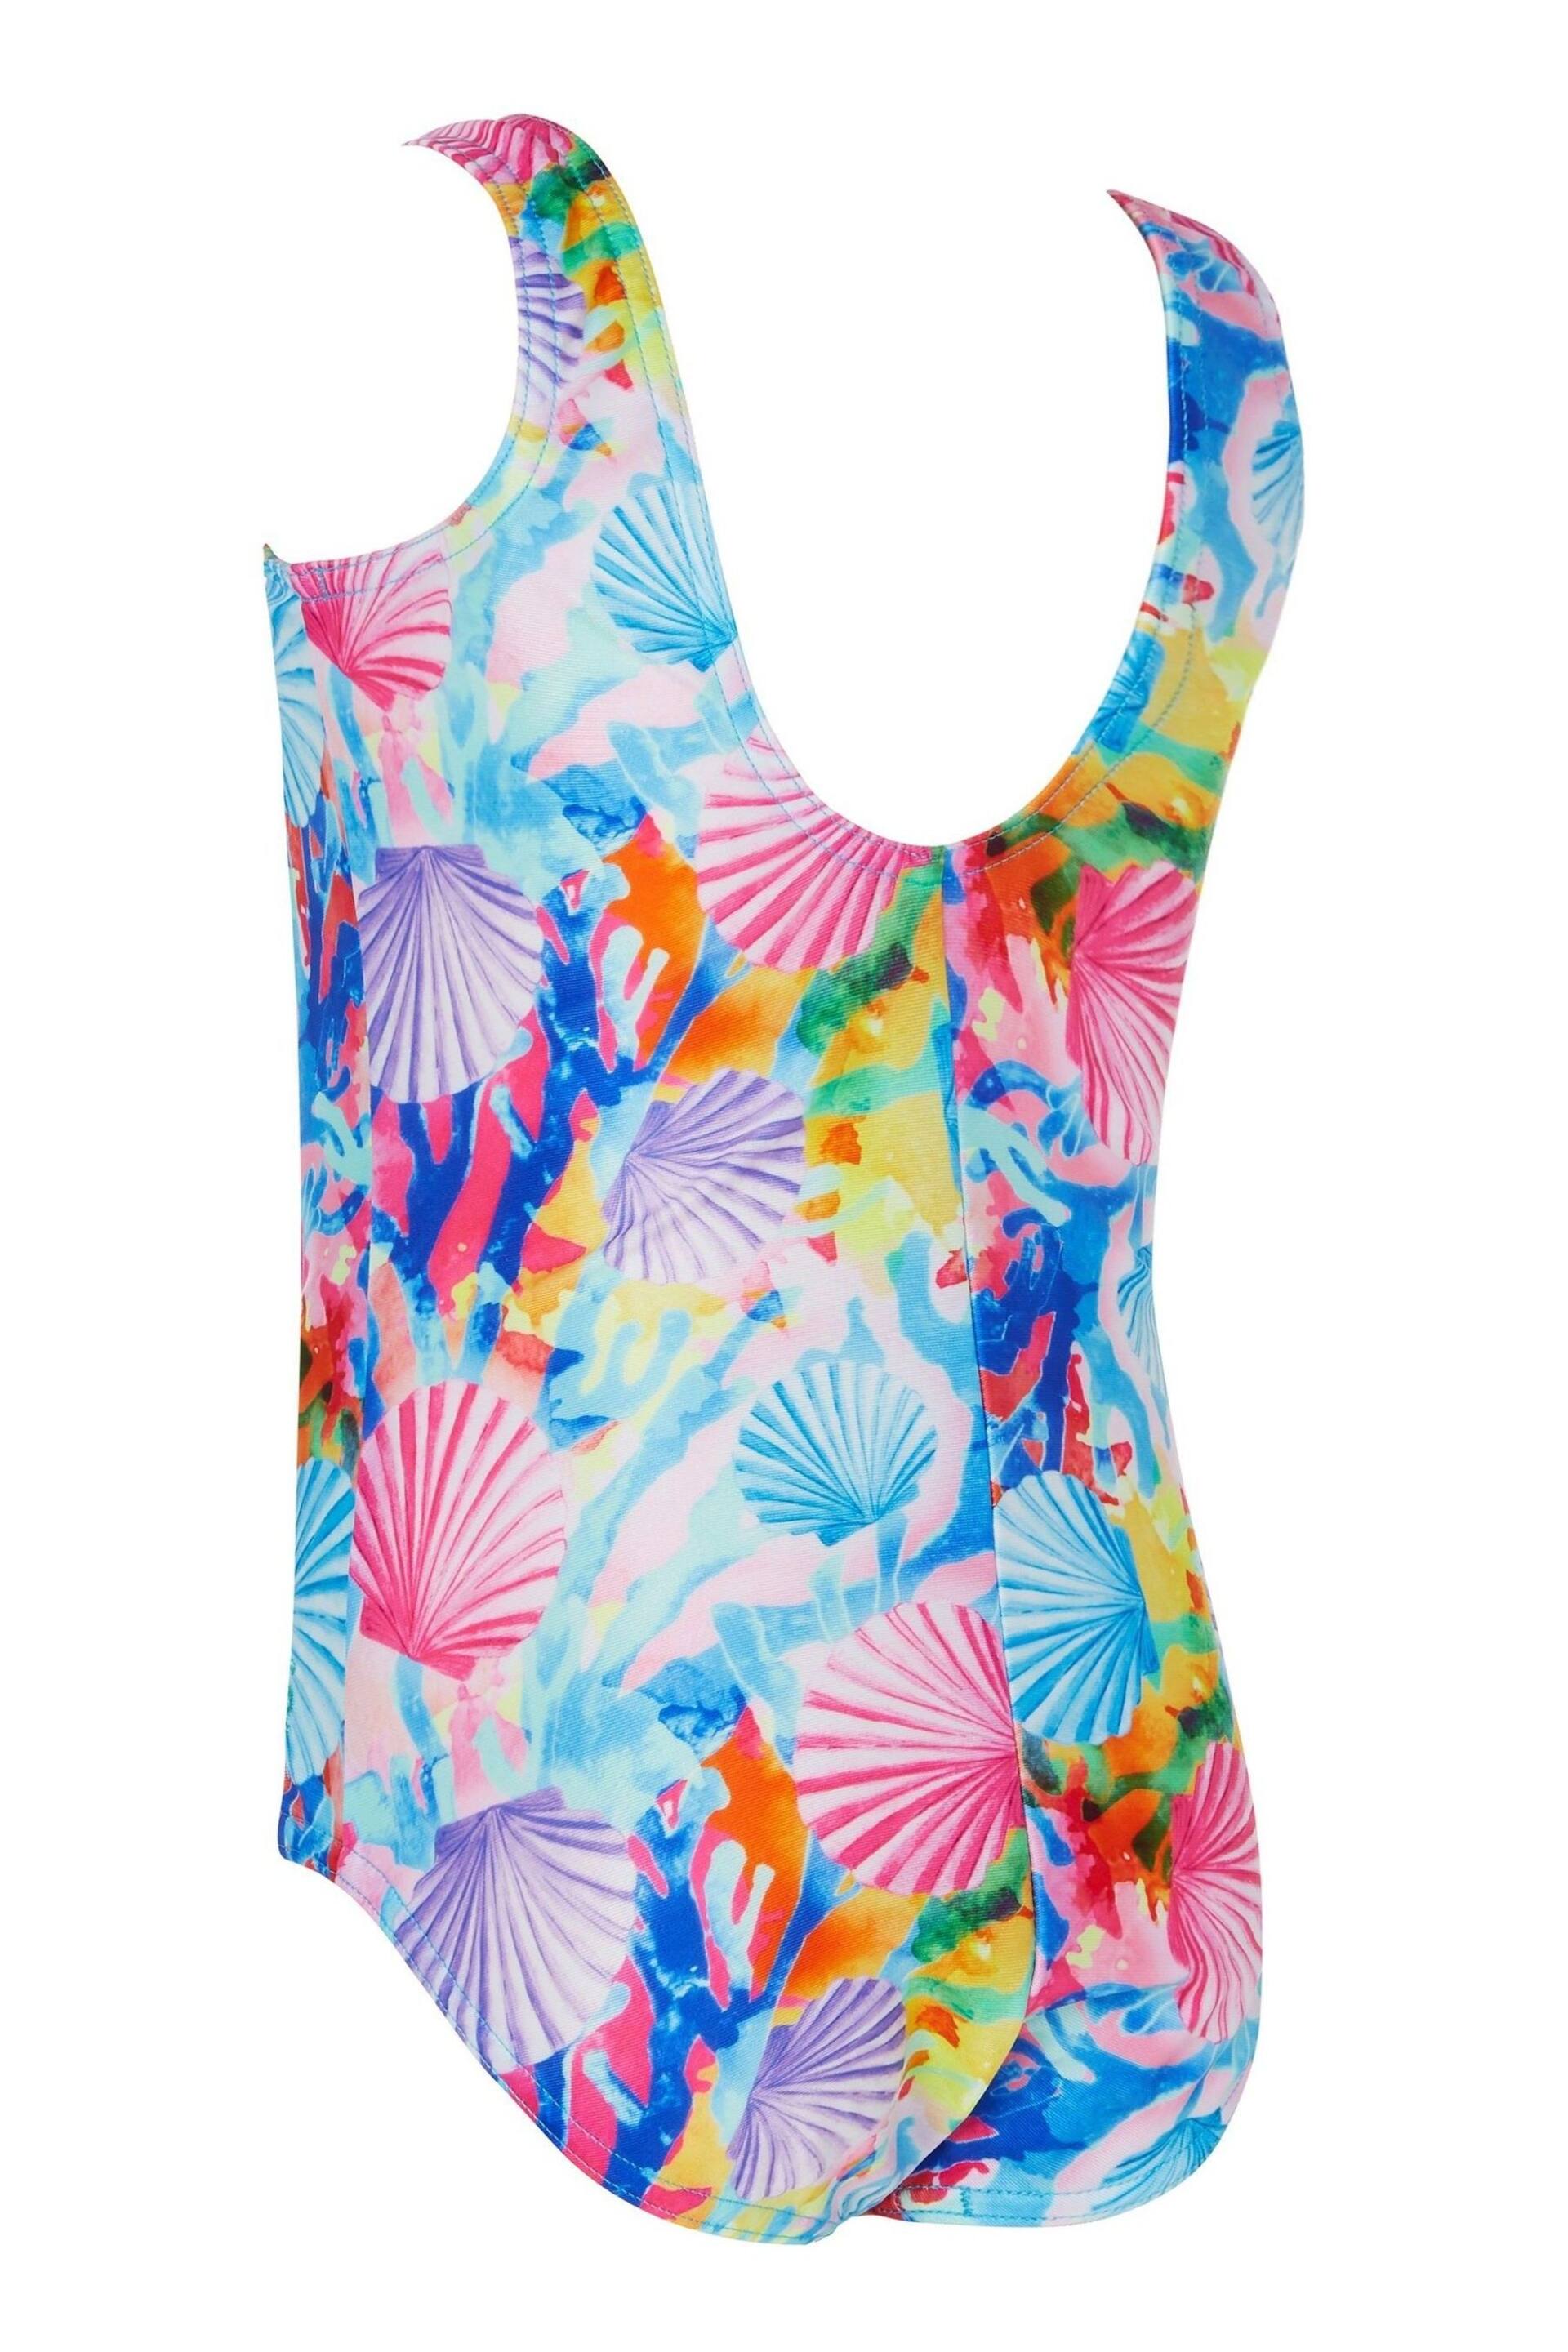 Zoggs Girls Scoopback One Piece Swimsuit - Image 7 of 7